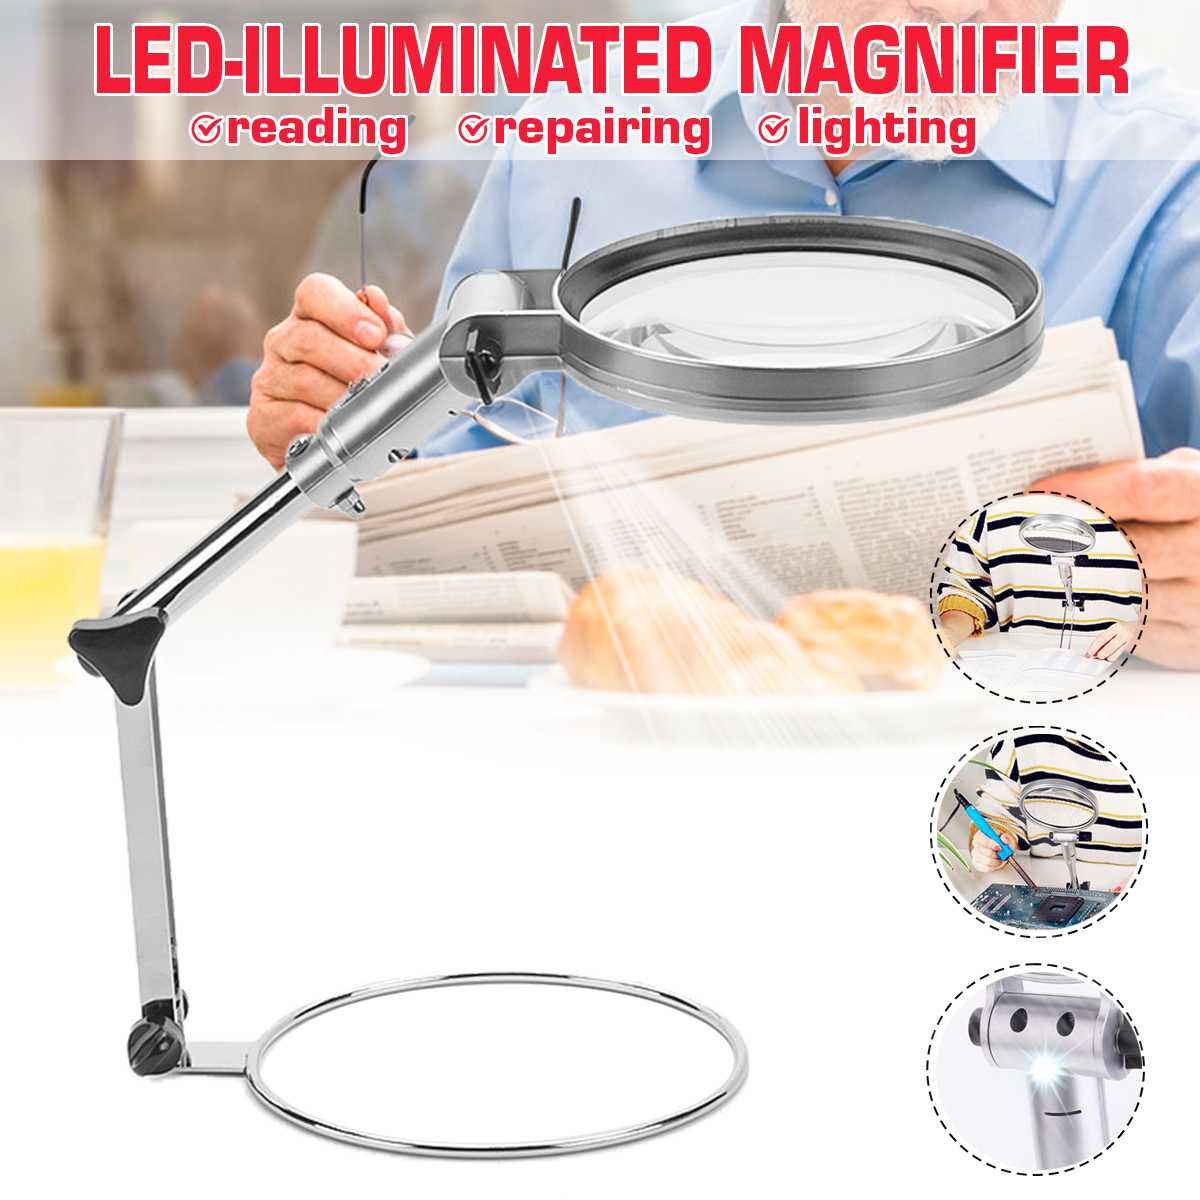 25X-120mm-Foldable-Desktop-Illuminated-Magnifier-Magnifying-Glass-Reading-Loupe-LED-Lighted-Lamp-Opt-1647047